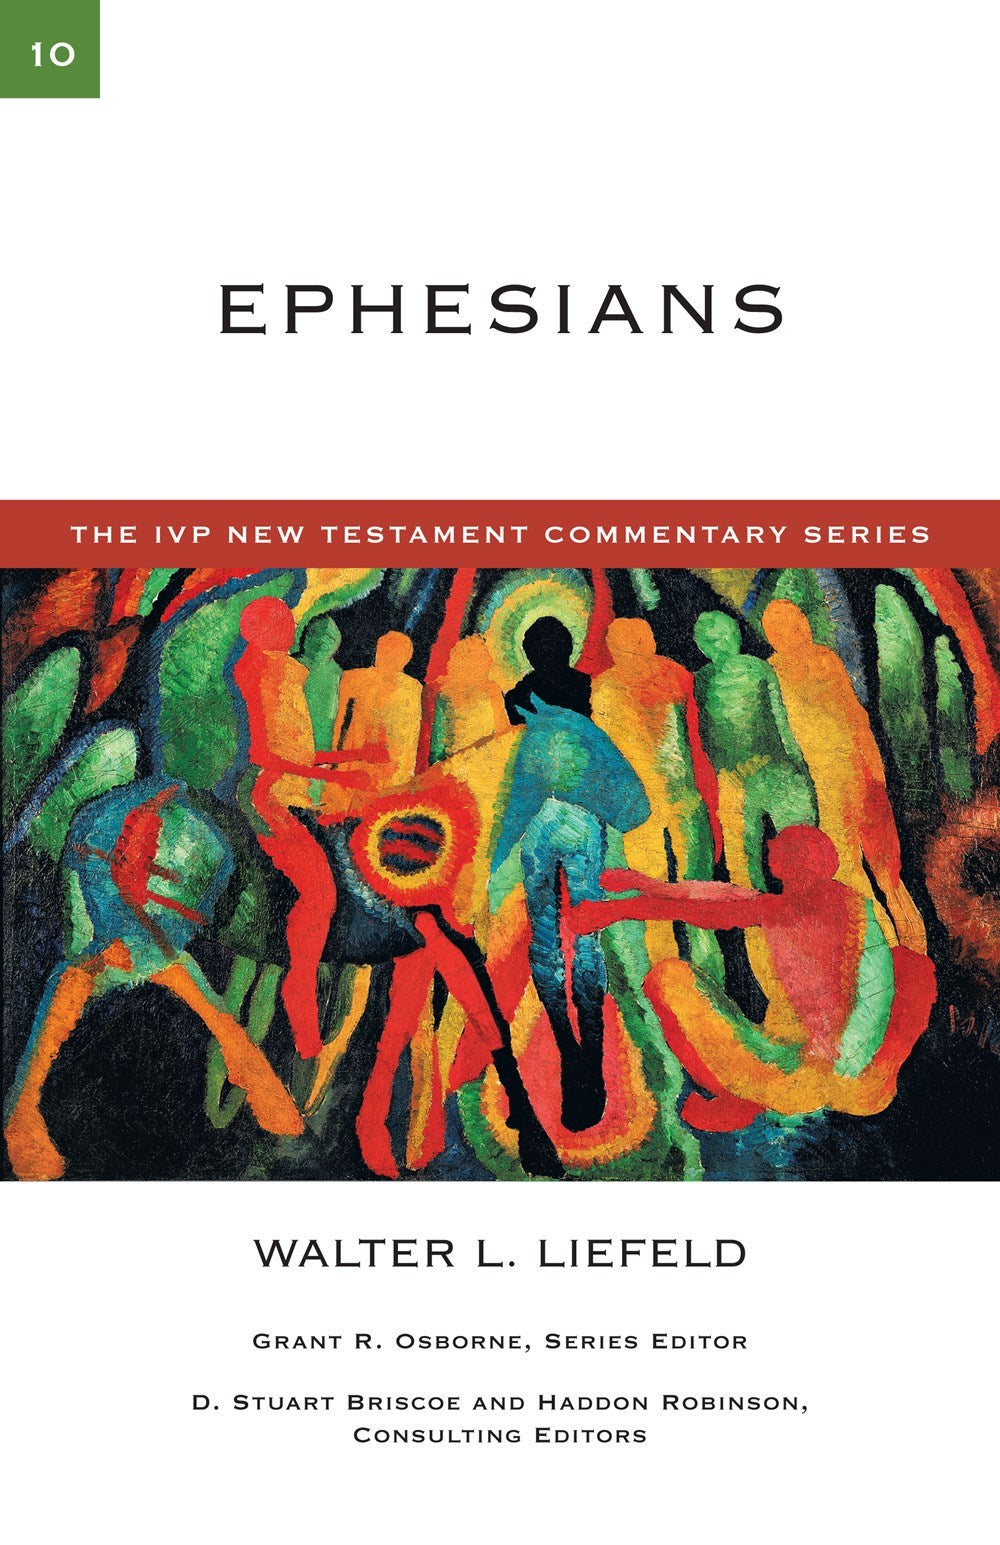 Ephesians (The IVP New Testament Commentary Series Volume 10)